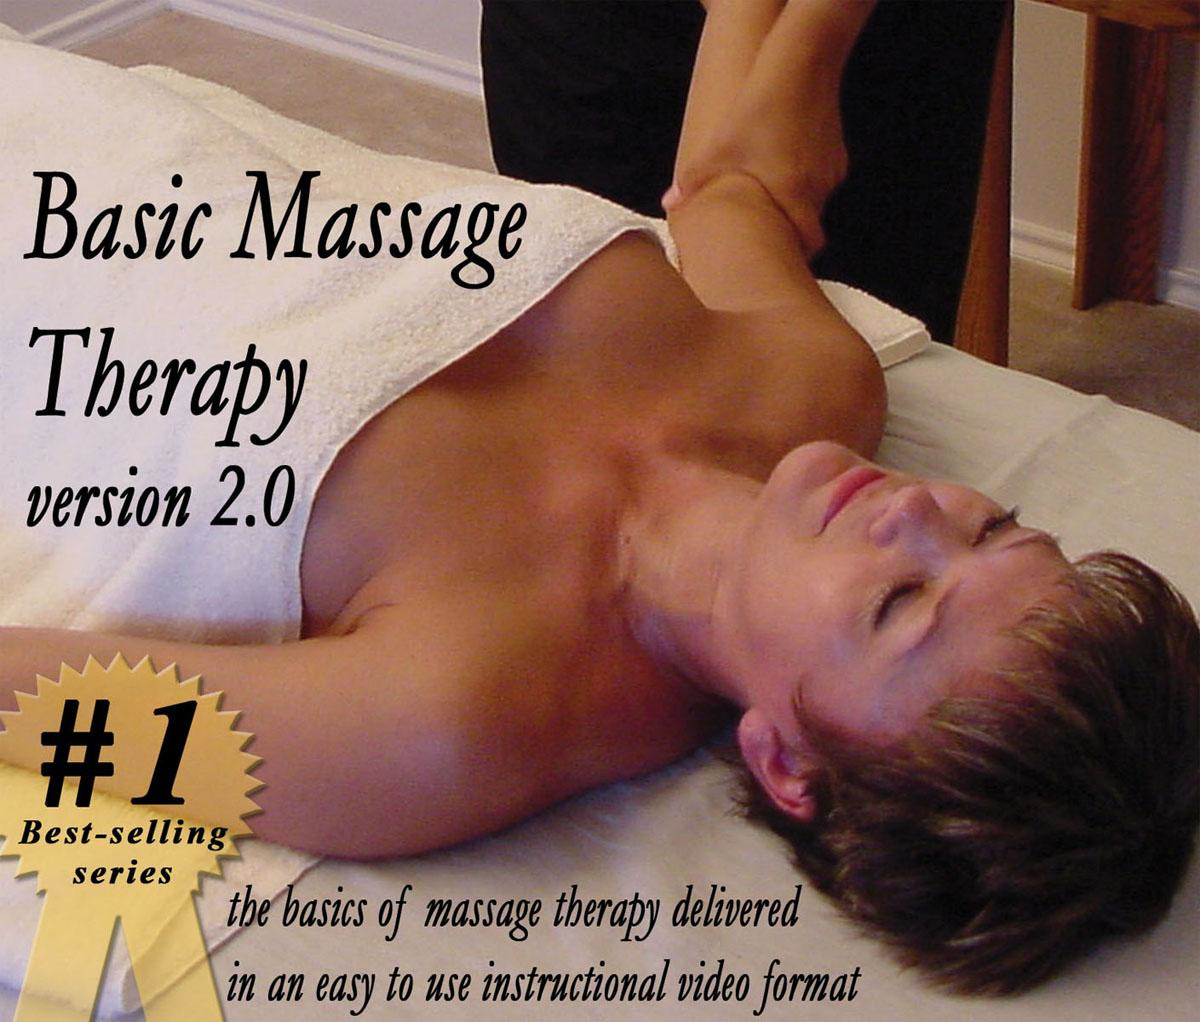 babbo natale recommends massage therapy techniques videos pic